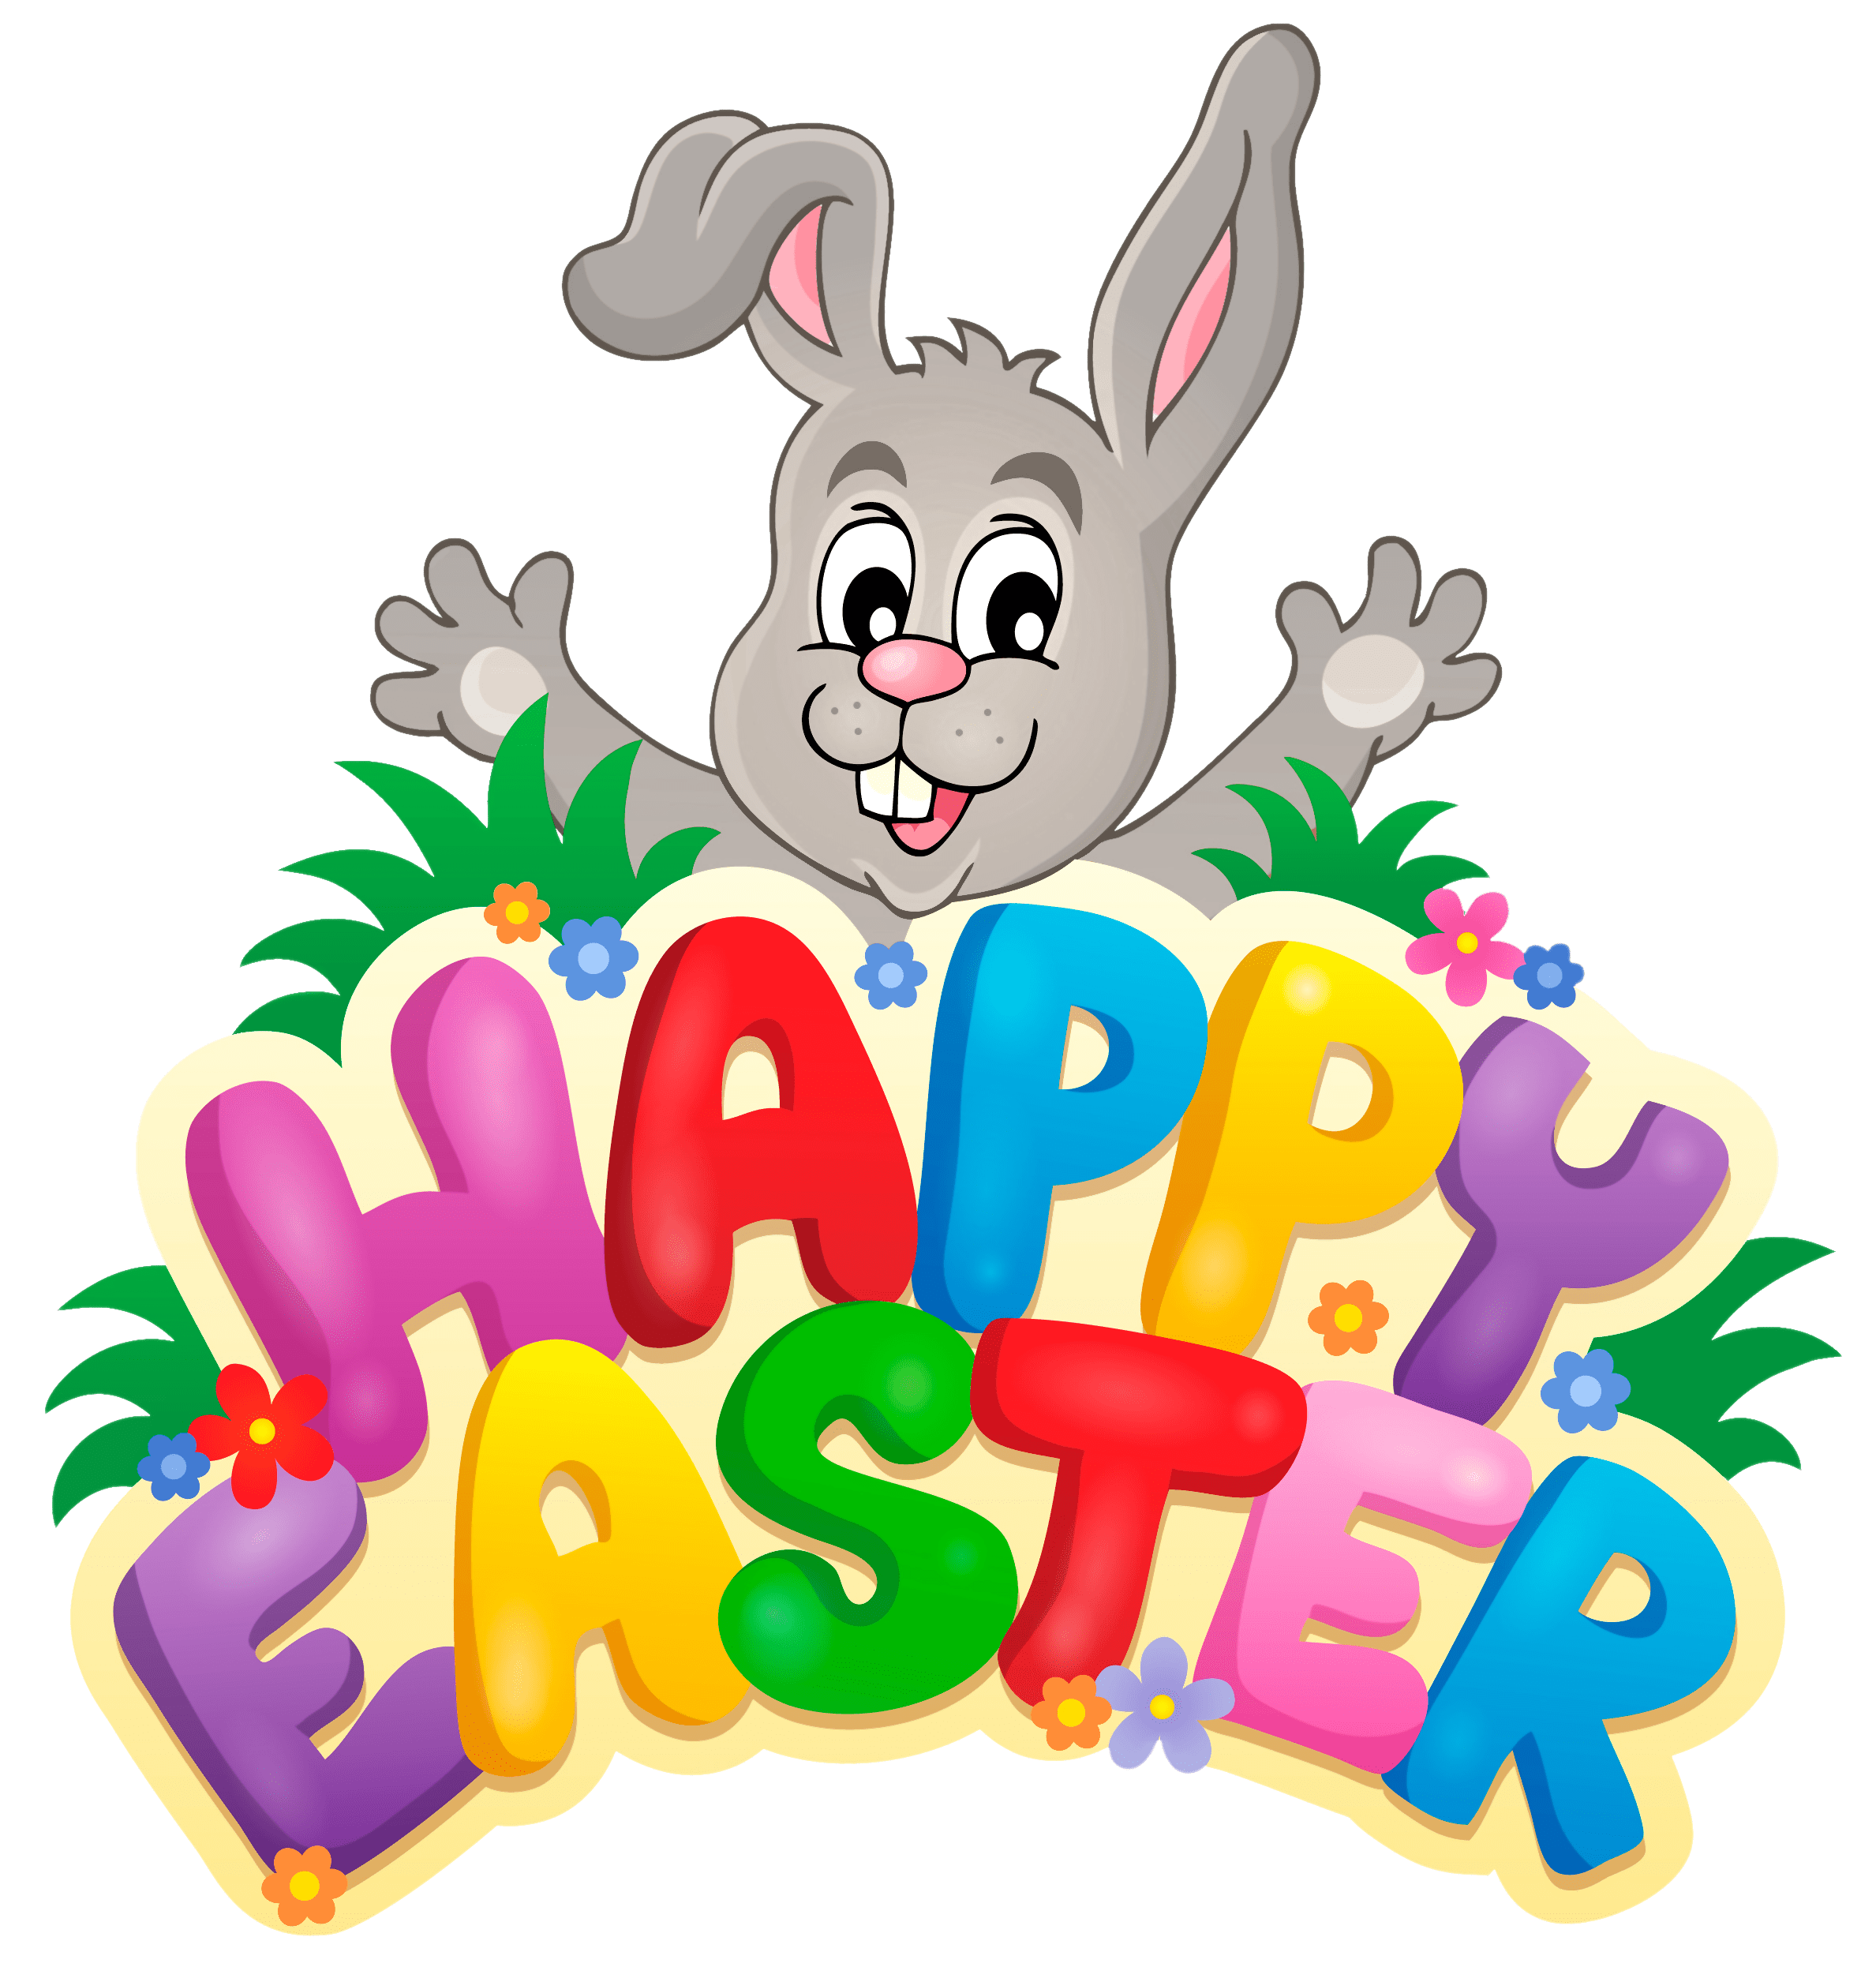 Happy Easter! Canadian Freebies, Coupons, Deals, Bargains, Flyers